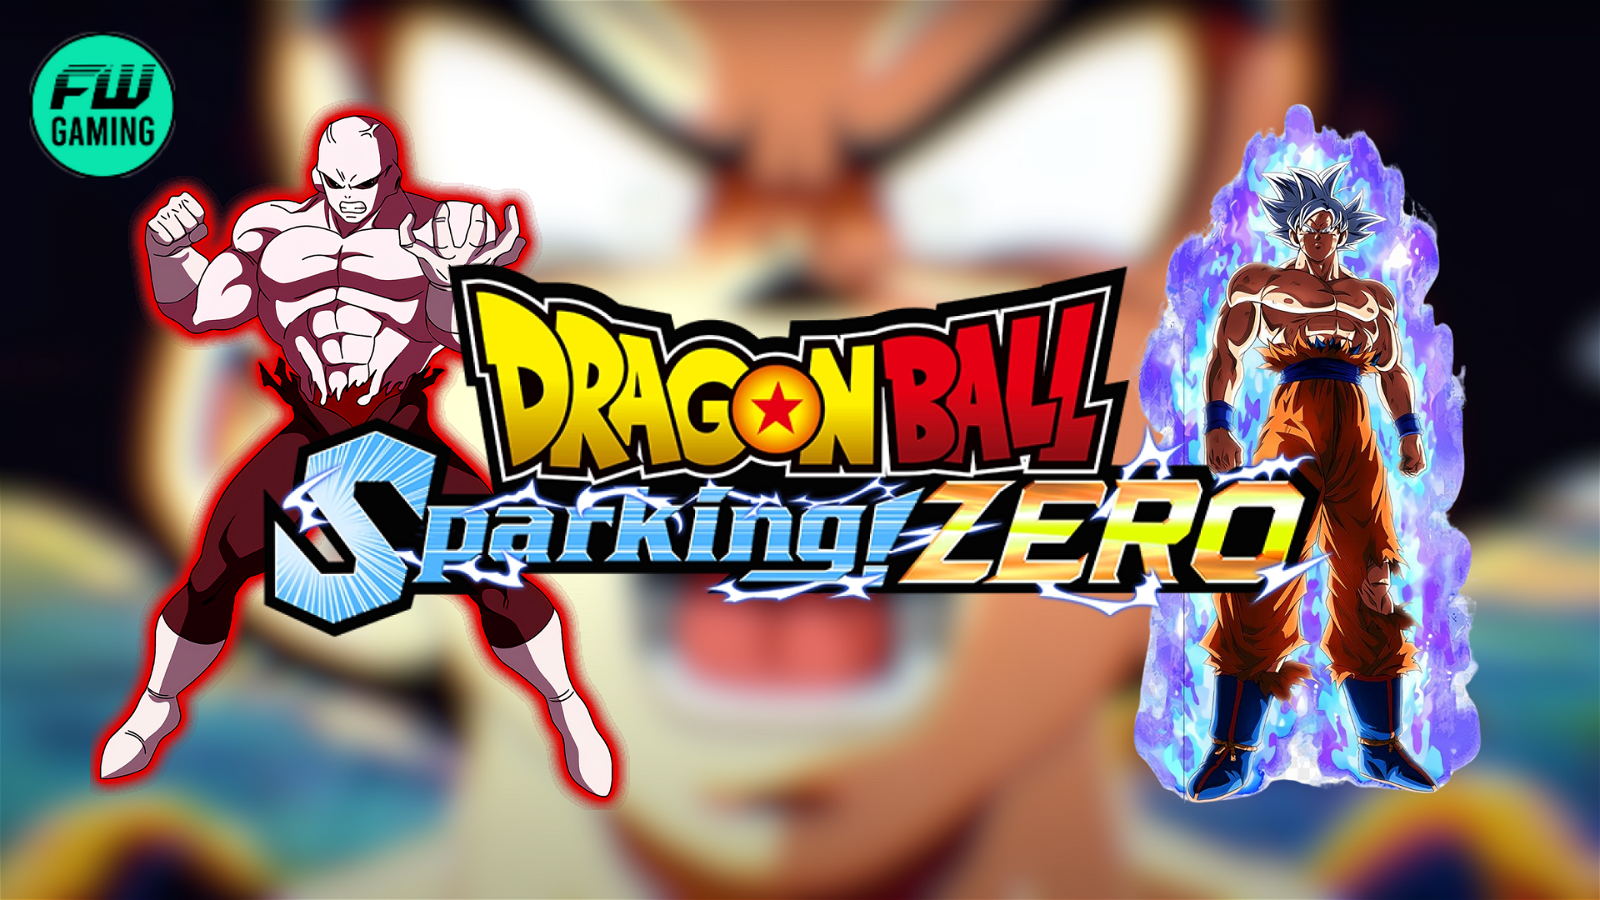 Dragon Ball: Sparking Zero's Next Trailer Has Been Pieced Together, and  It's Going to Be a